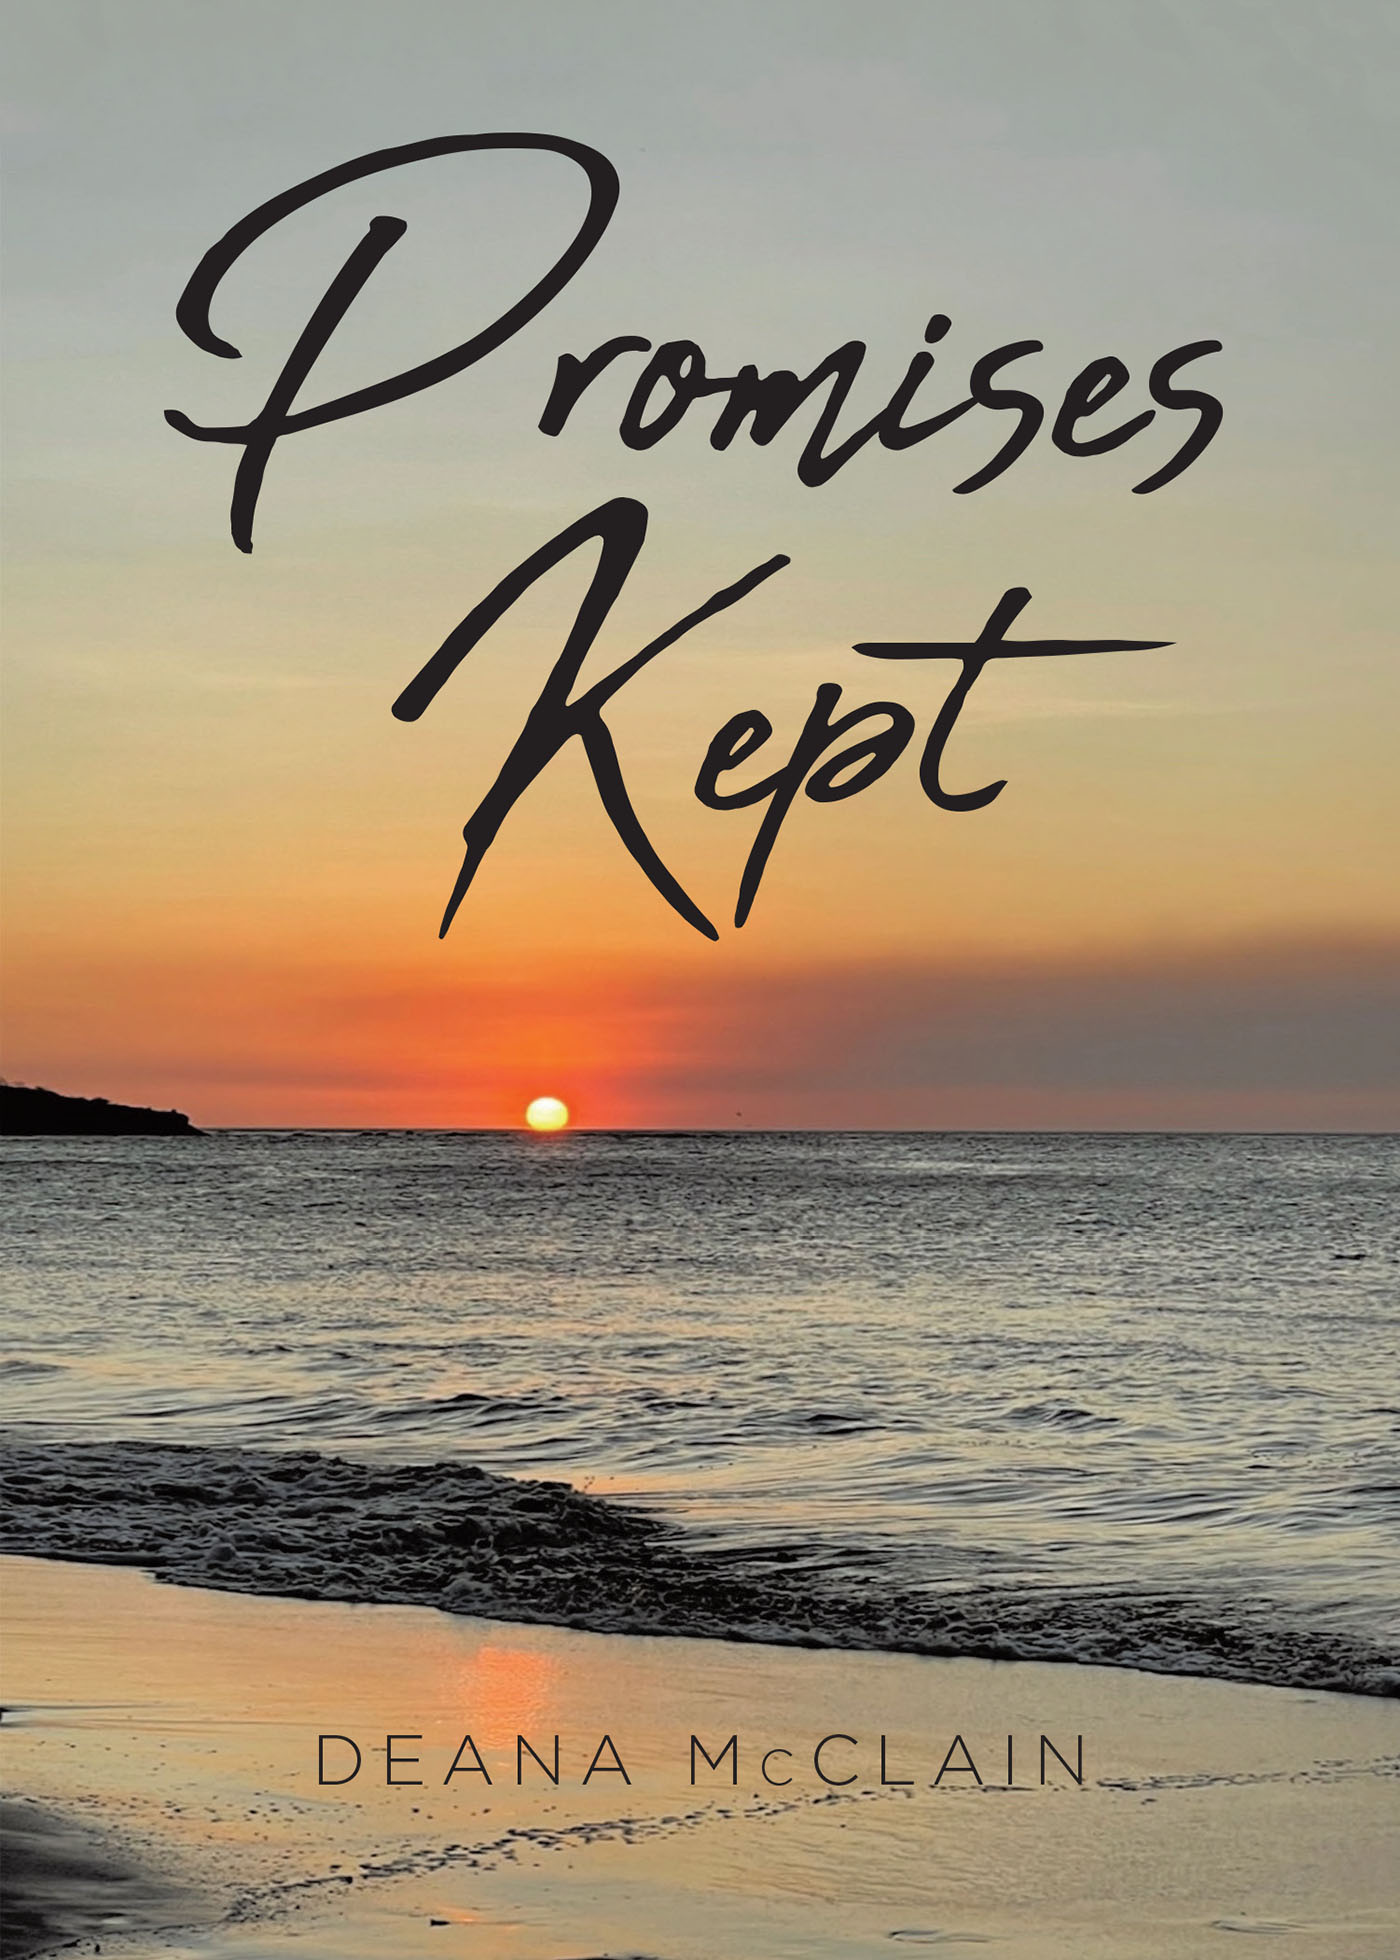 Deana McClain’s New Book, "Promises Kept," is a Thought-Provoking Exploration of the Incredible Gifts That the Creator Grants to Those Willing to Receive Them